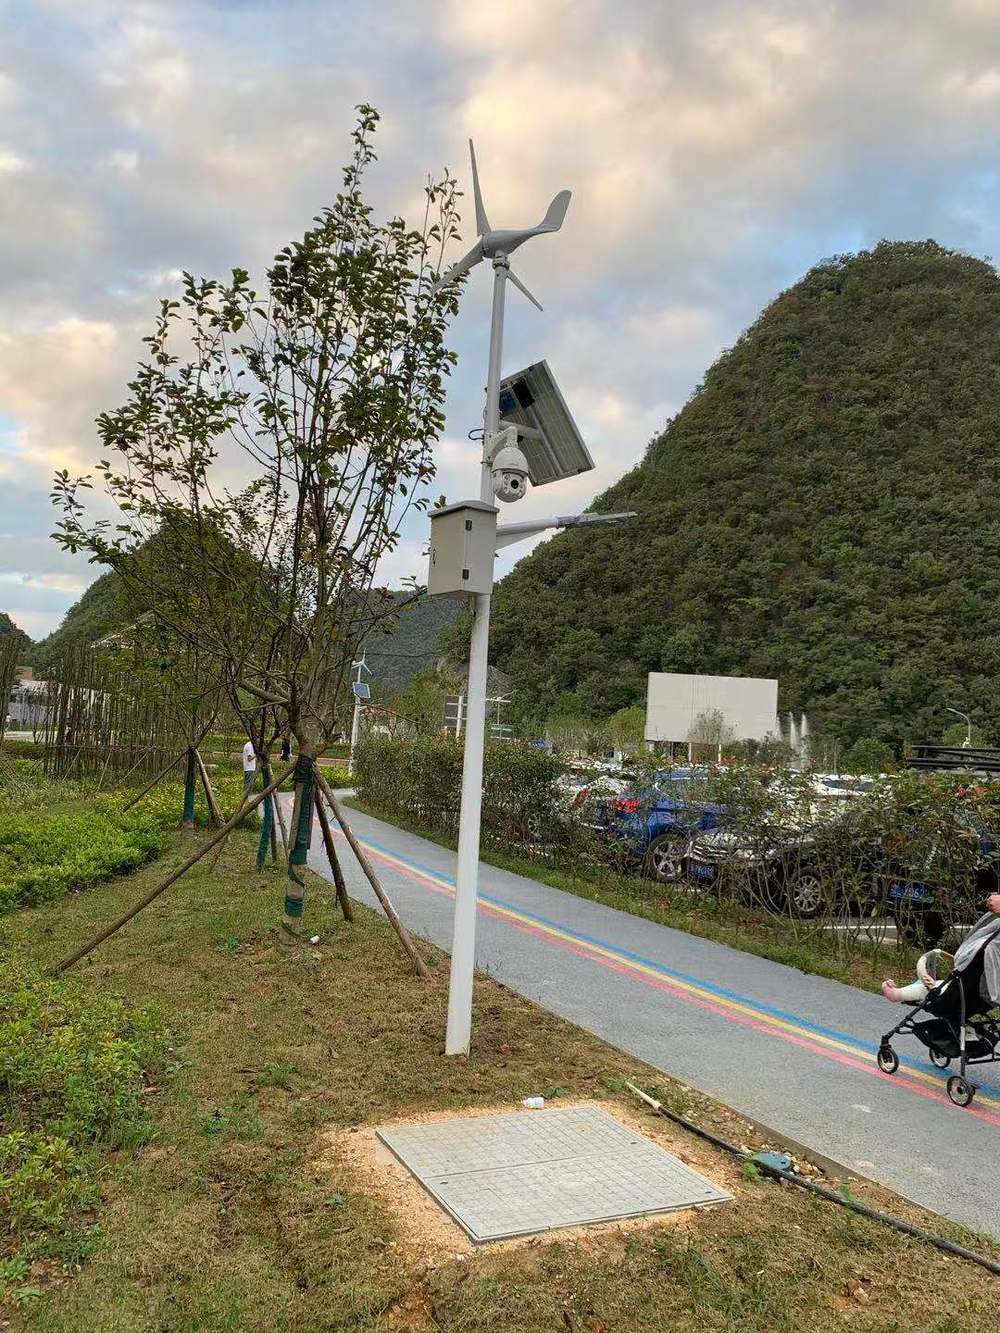 Case of wind and solar complementary monitoring with street lamps